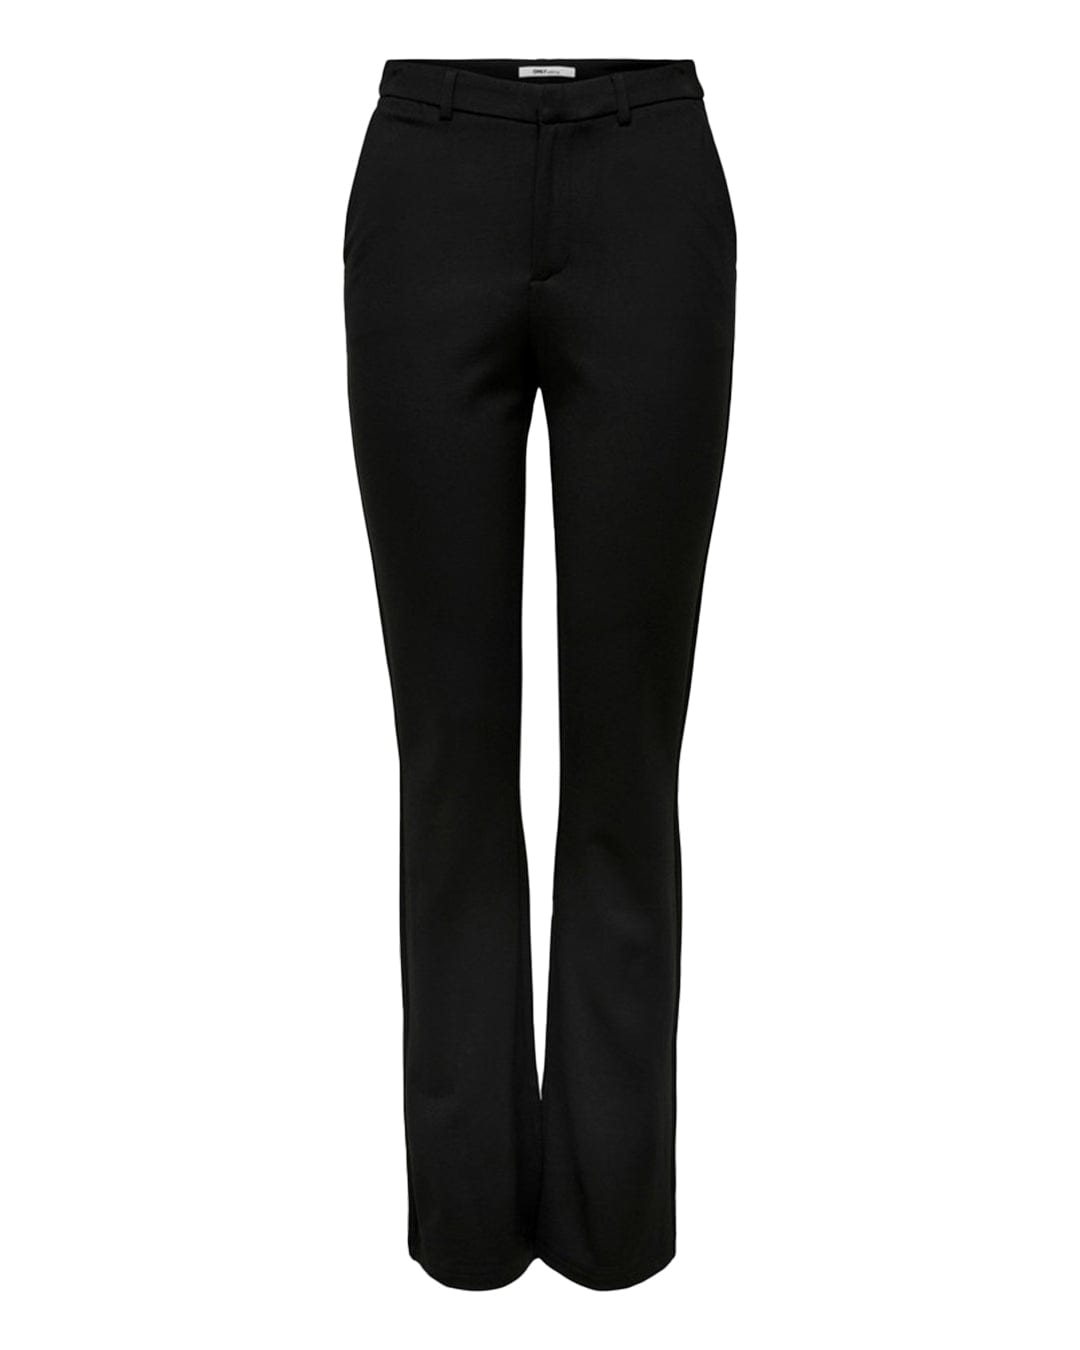 Only Trousers Only Elora-Vika Black Flare Trousers